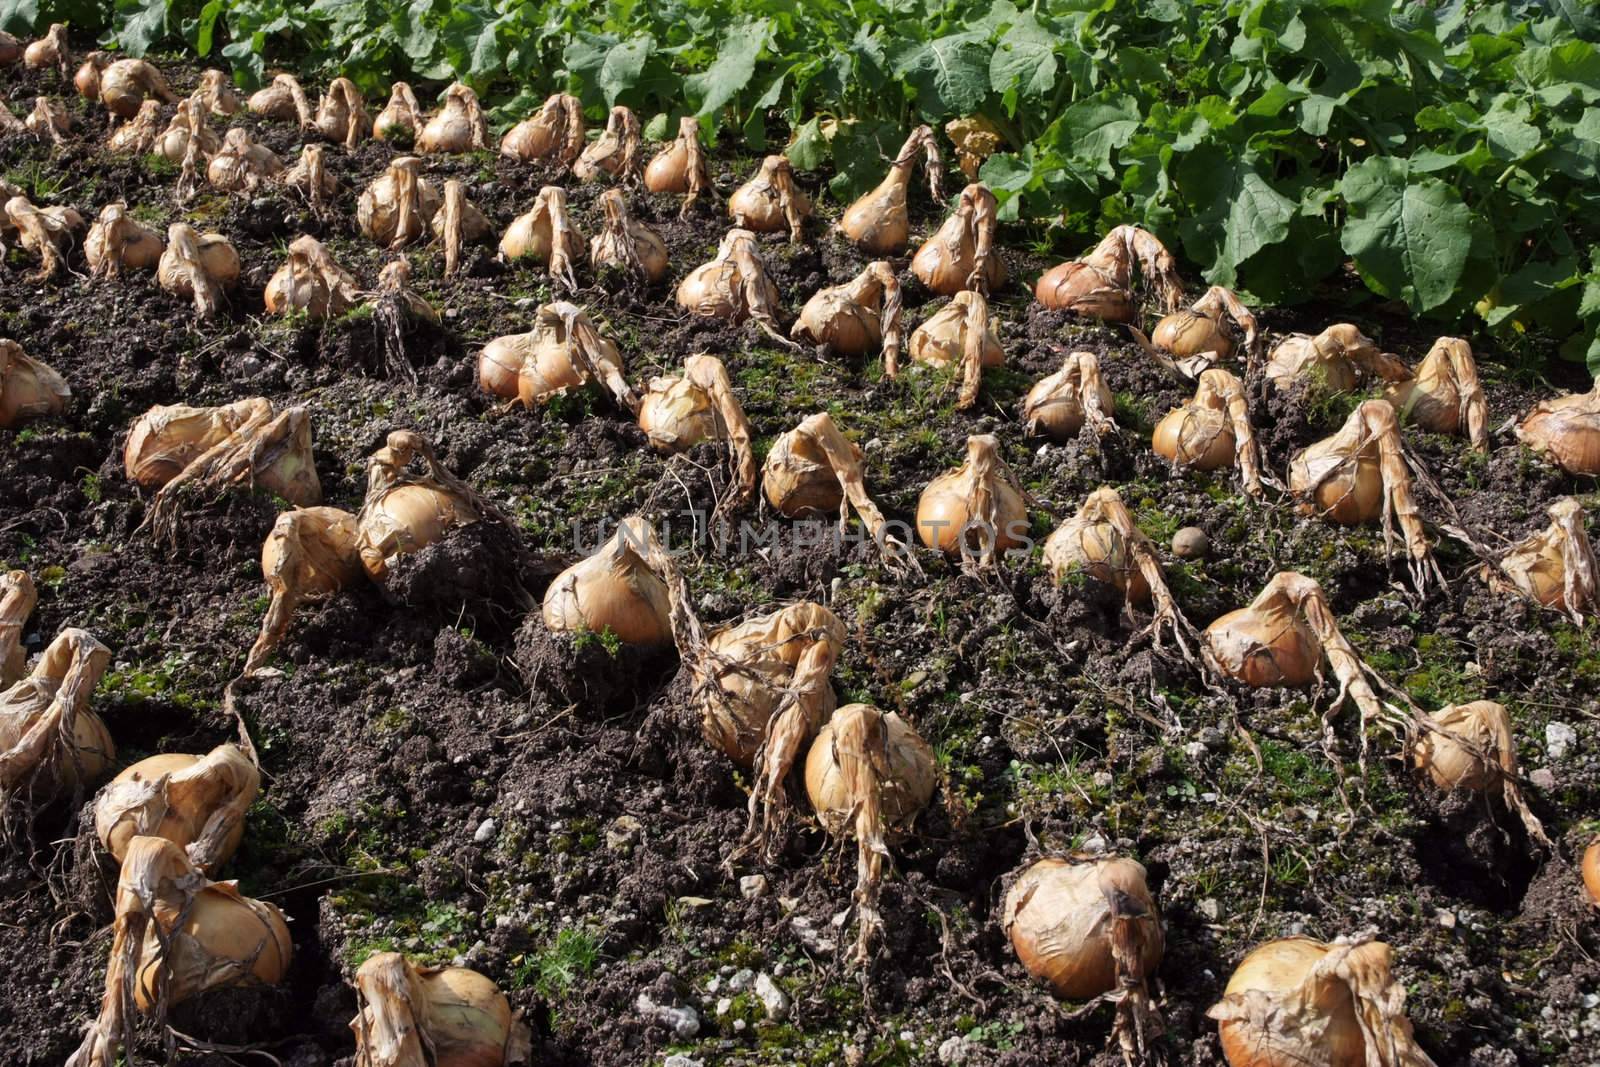 A group of onions ready for harvest